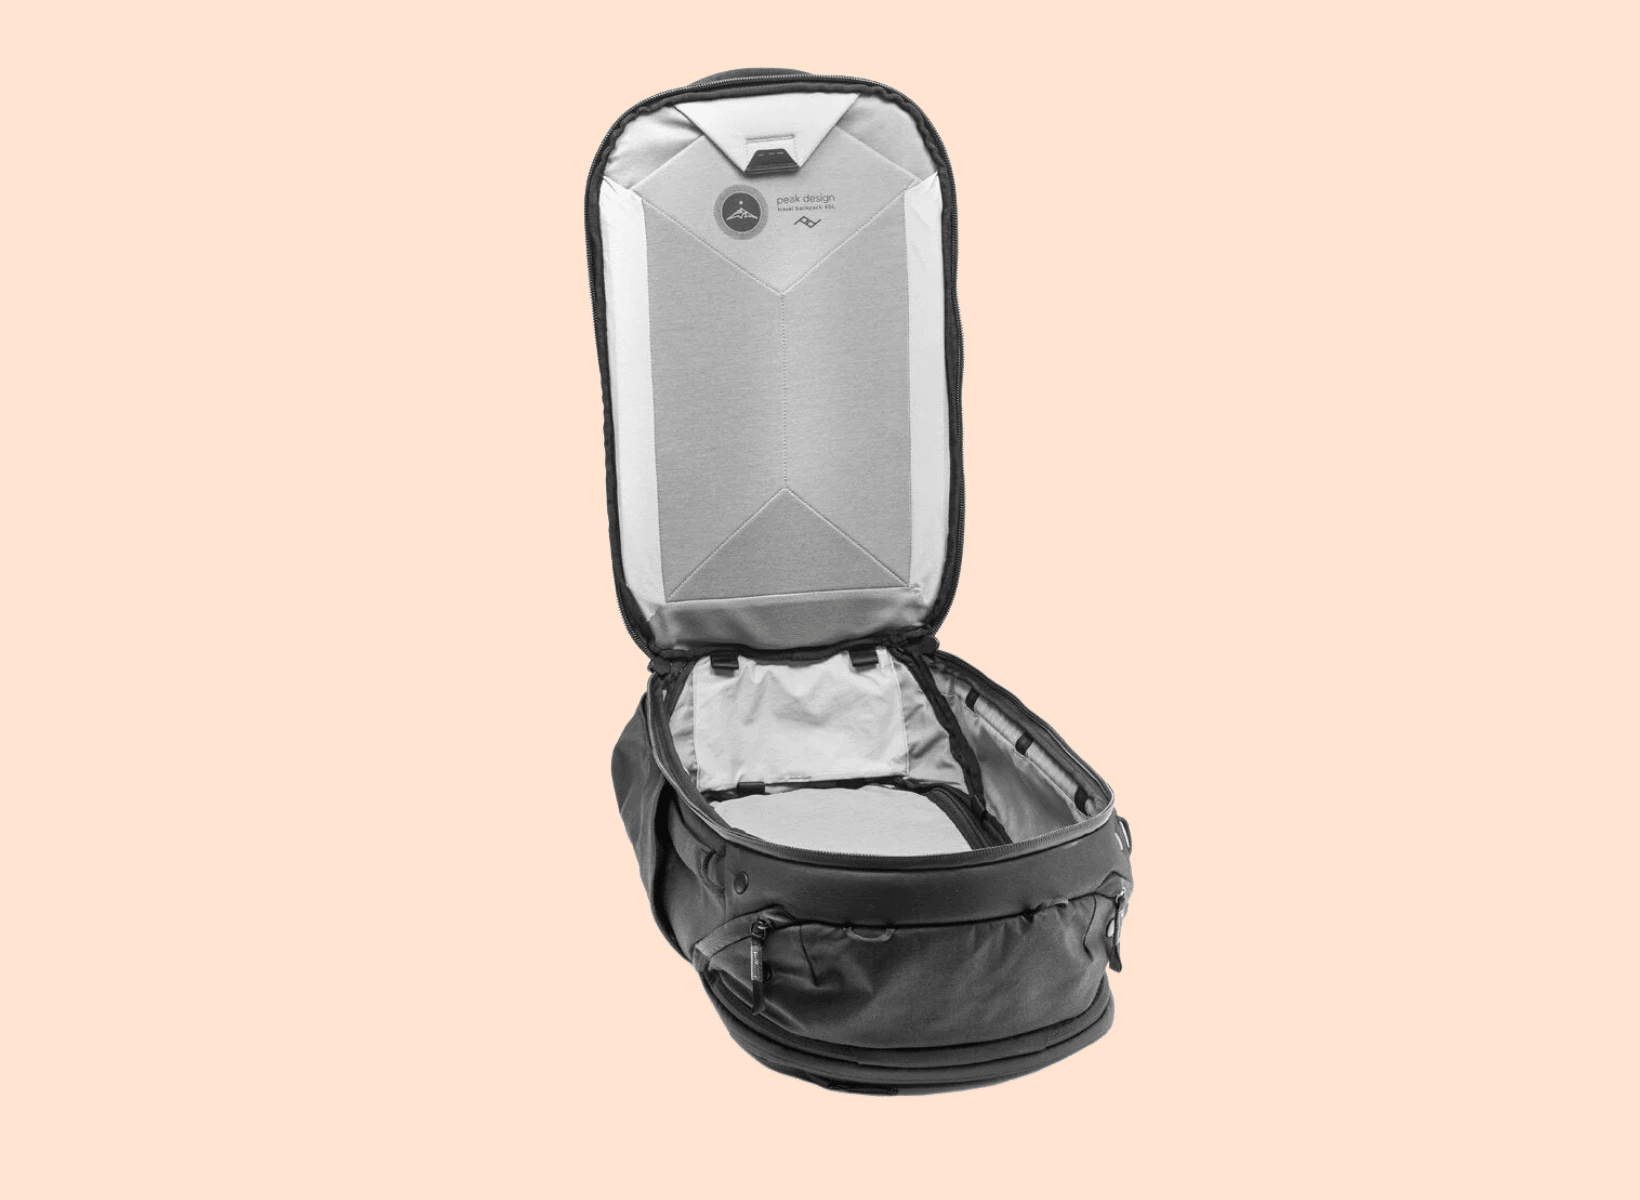 The 15 best travel backpacks to take on holiday